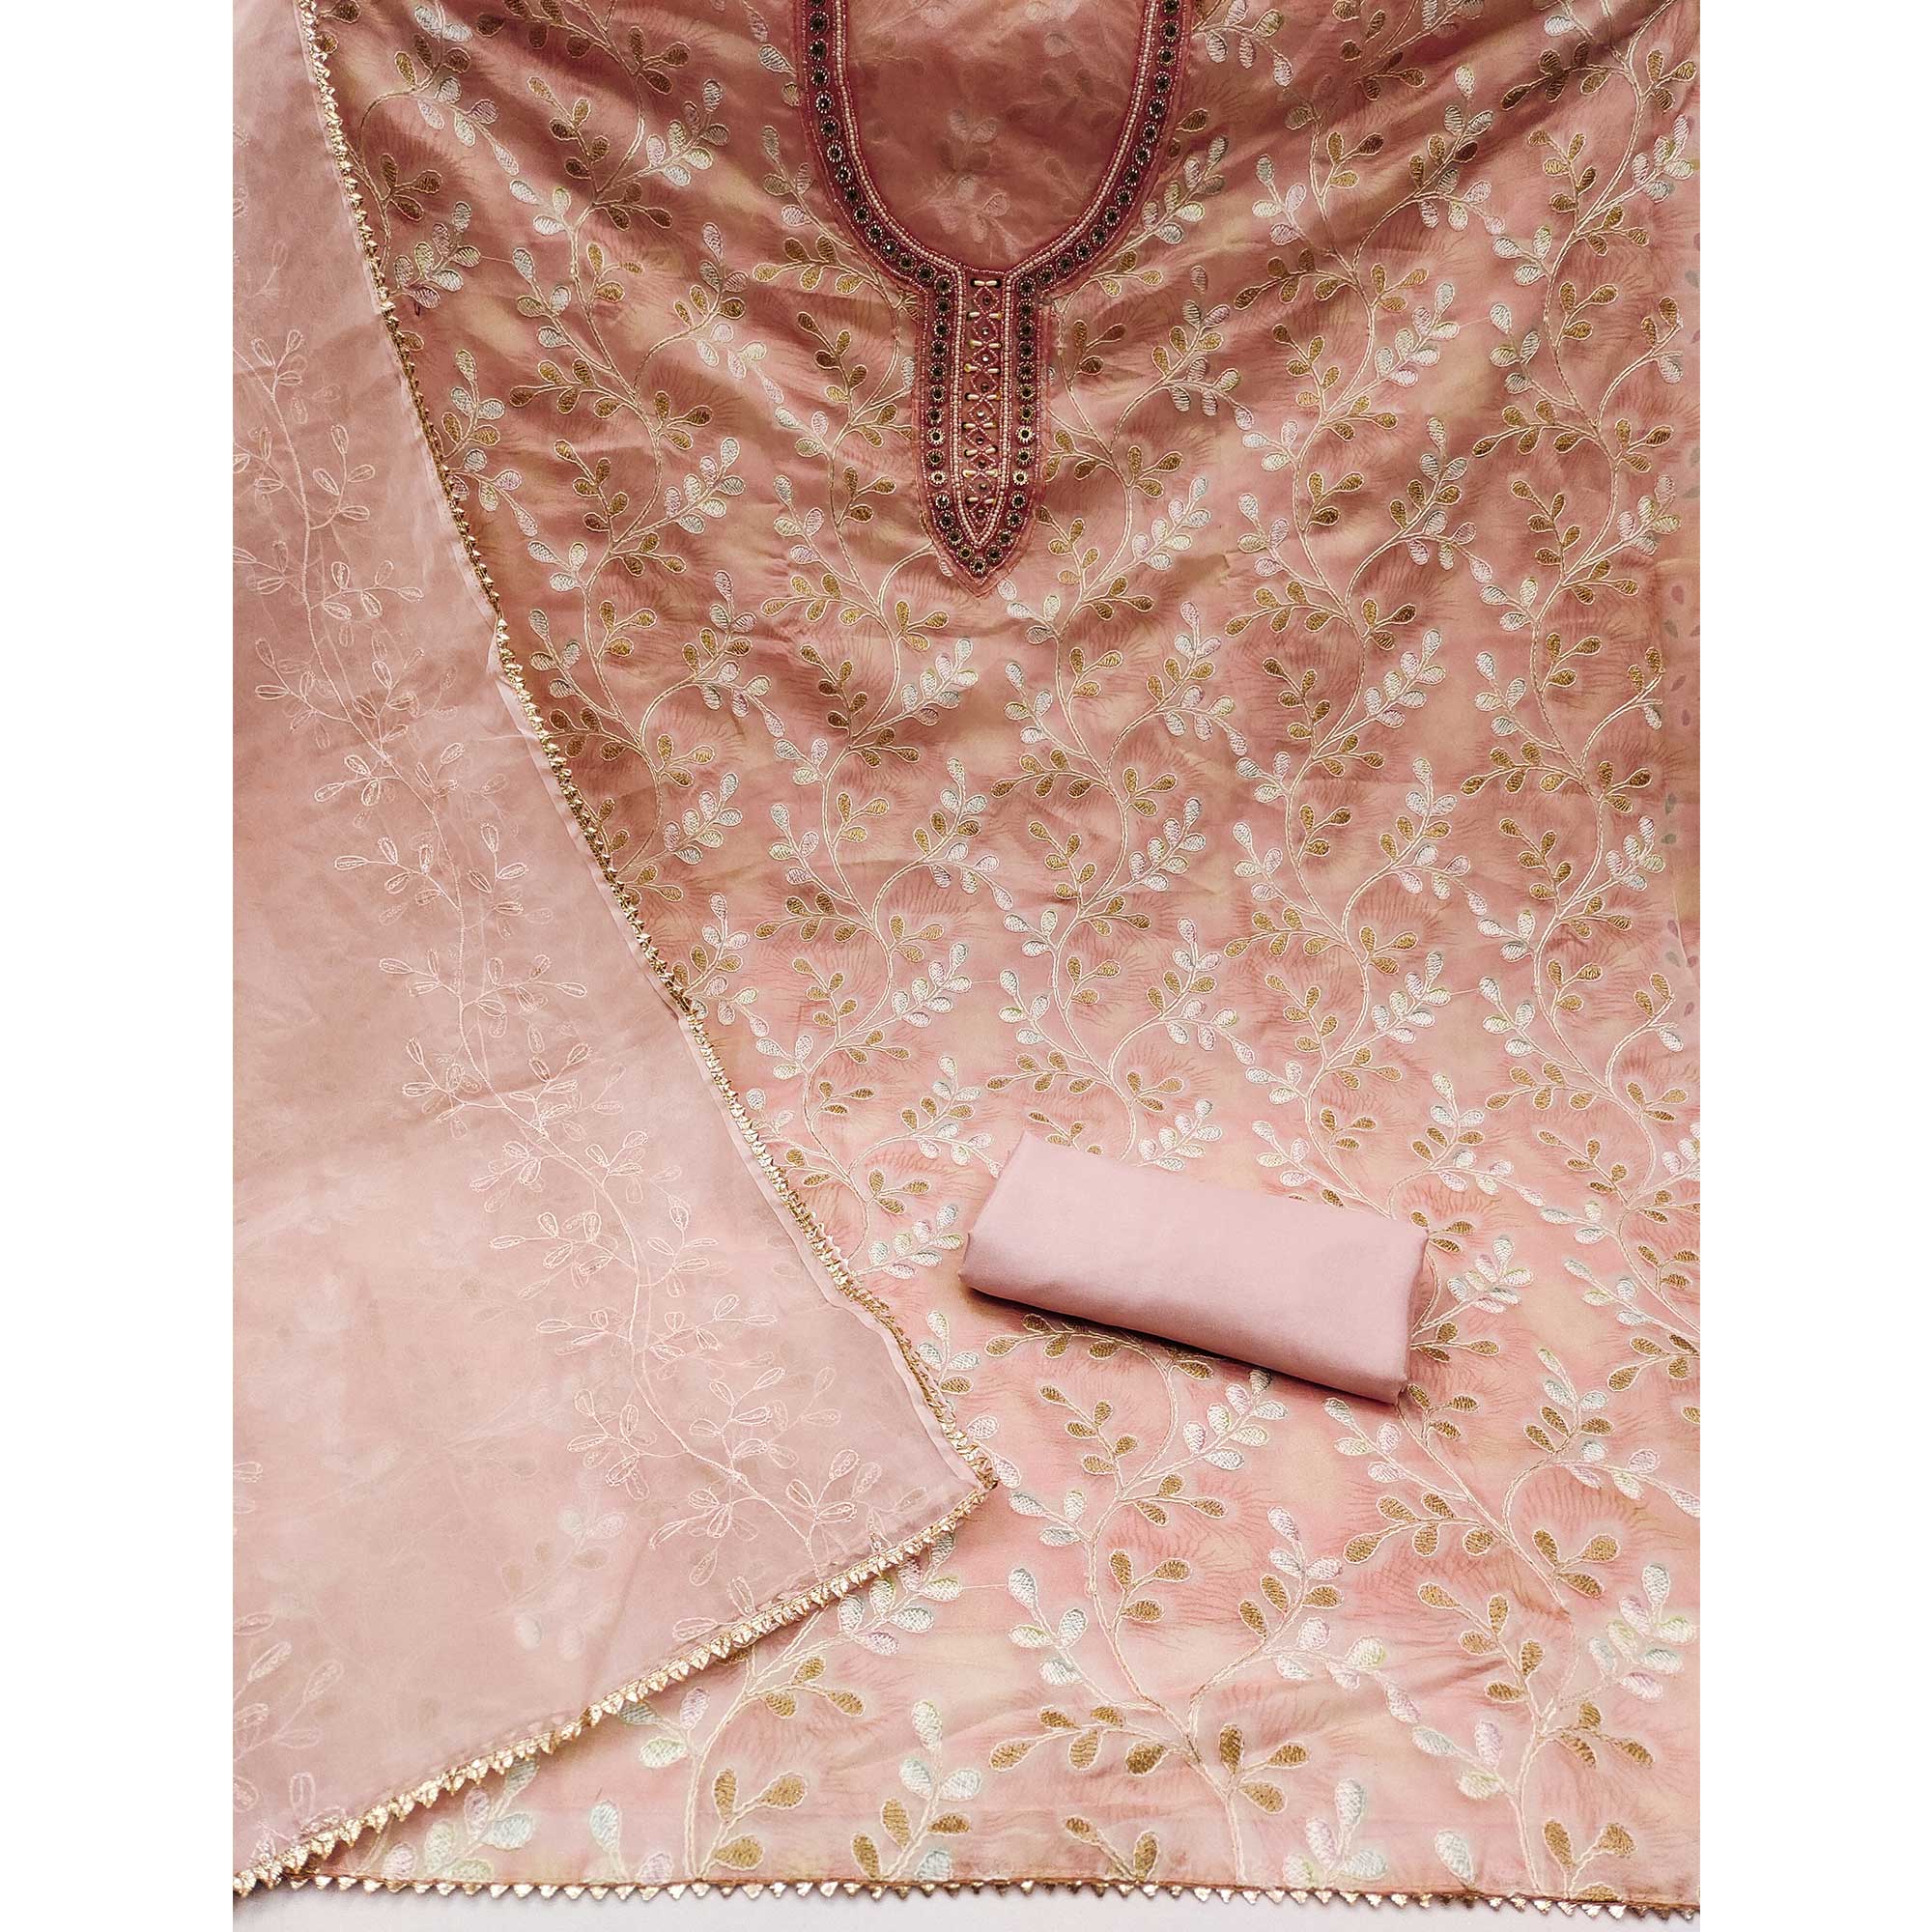 Peach Embroidered Organza Dress Material